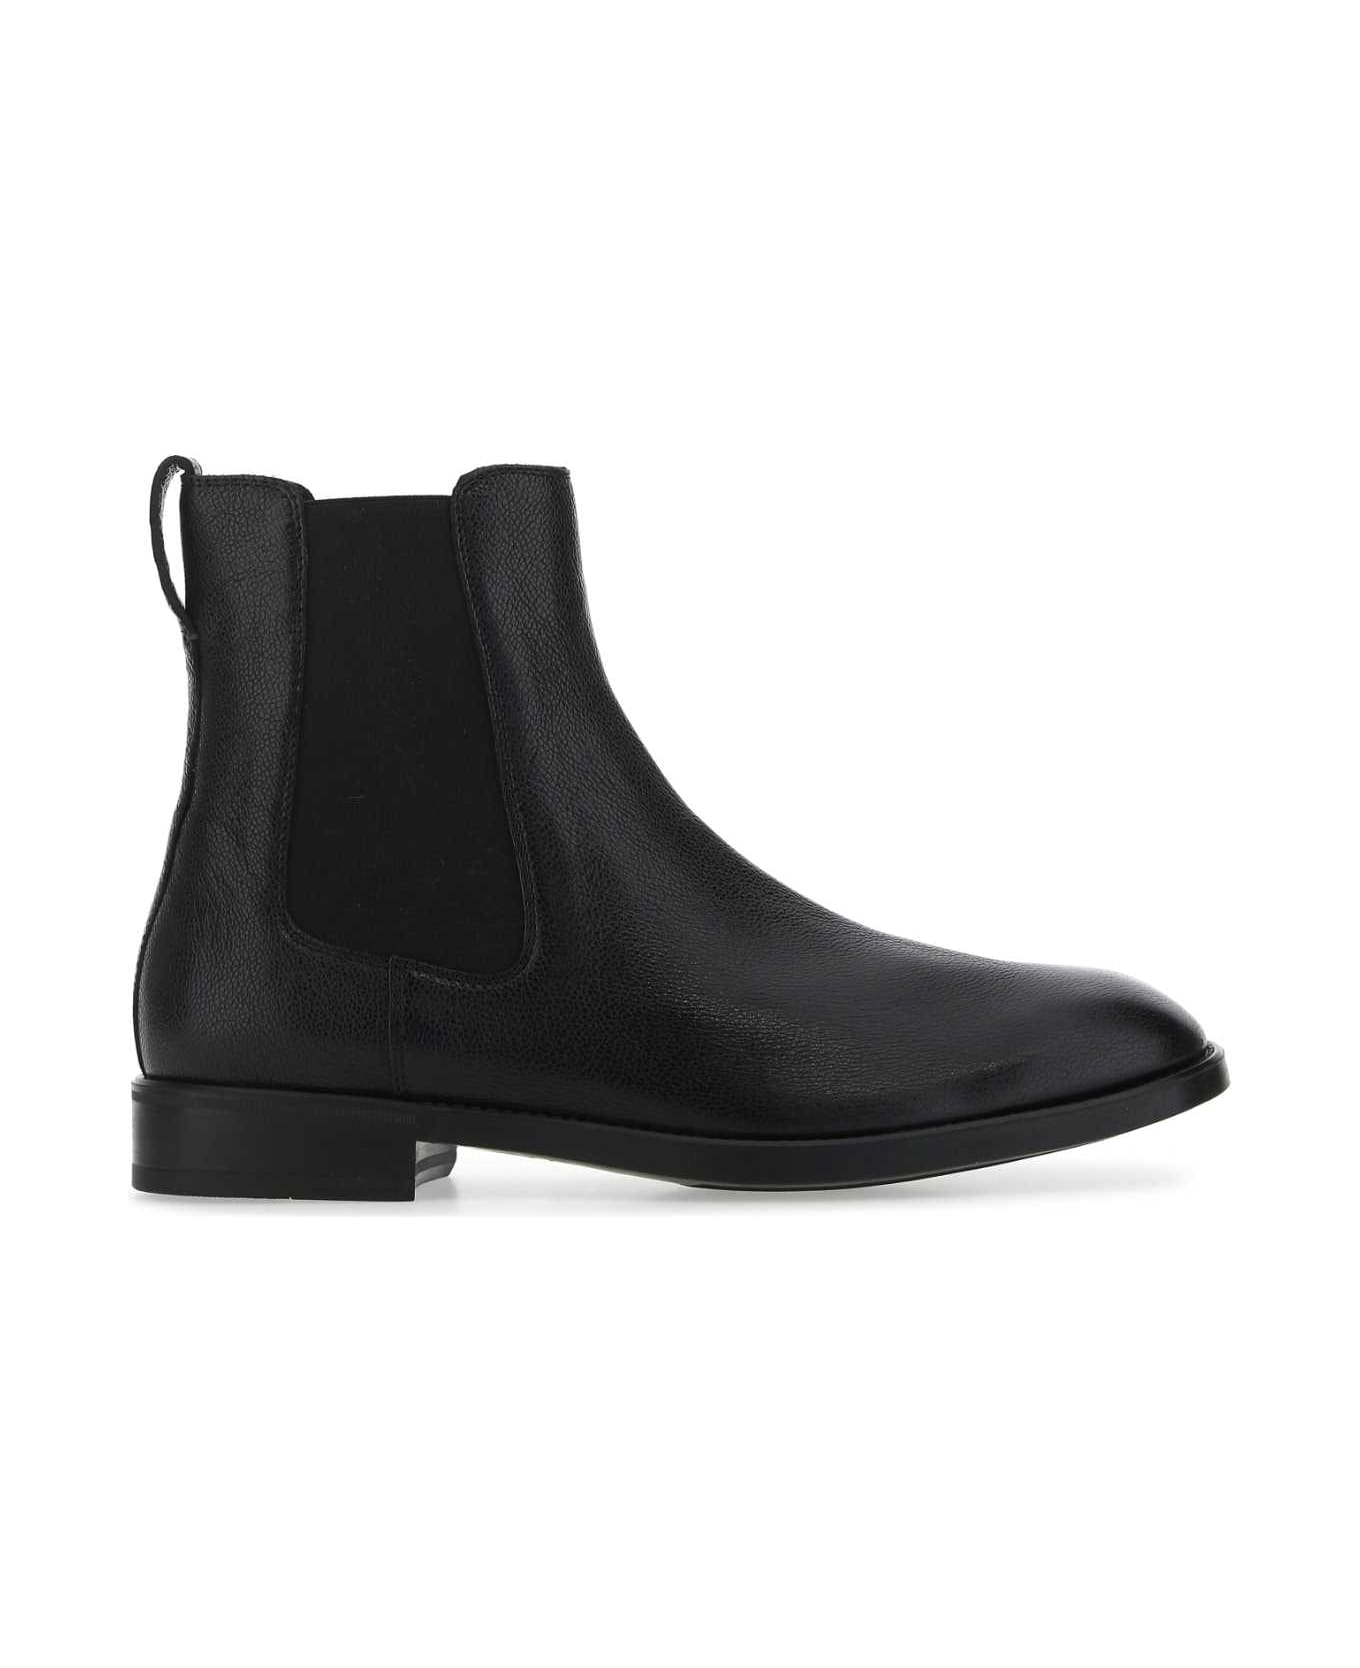 Tom Ford Black Leather Ankle Boots - U9000